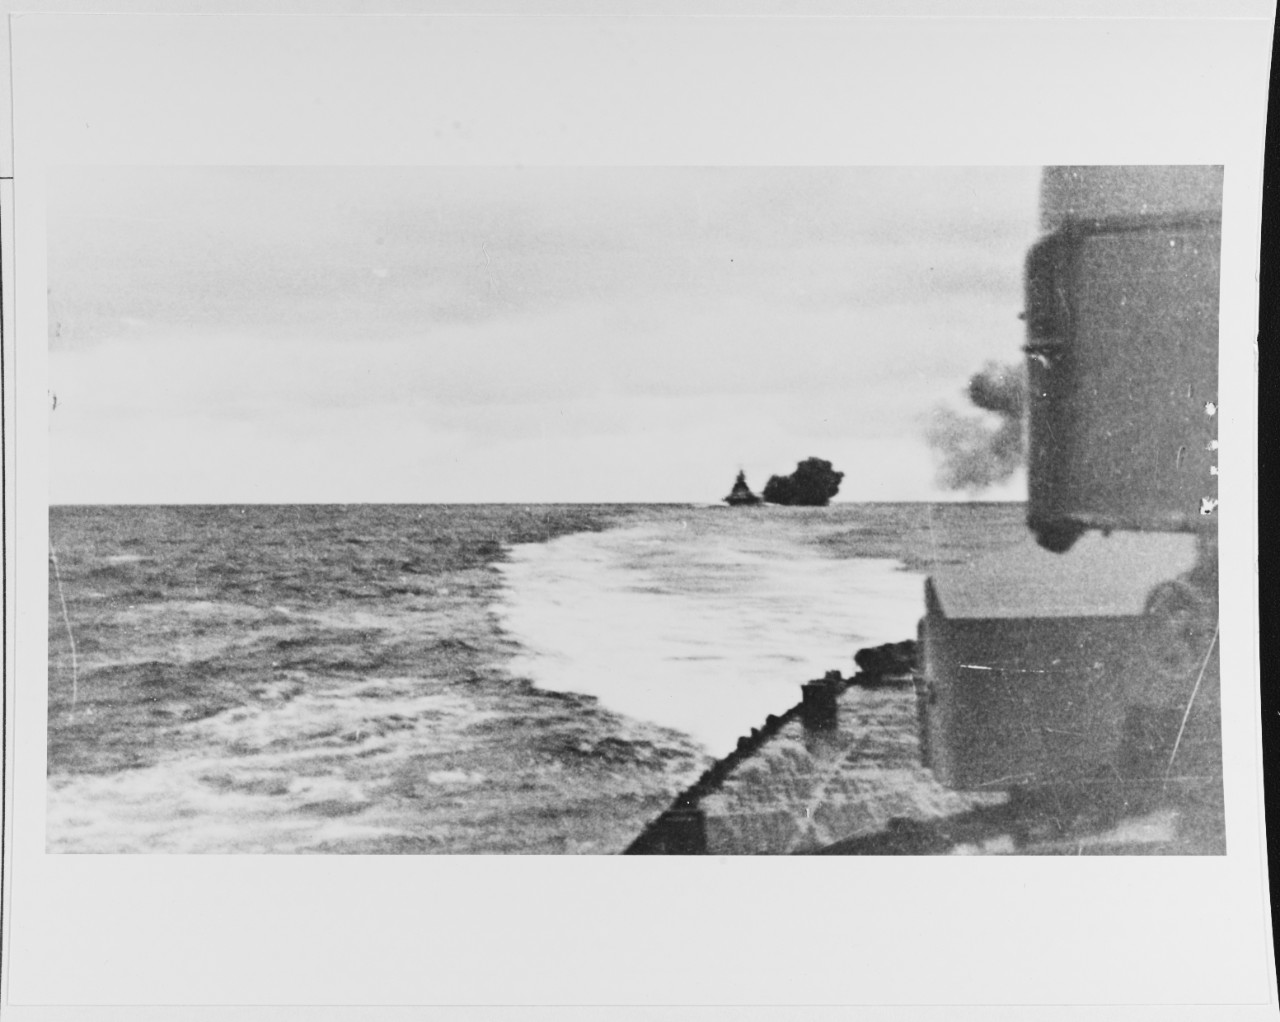 Photo #: NH 69722  Battle of the Denmark Strait, 24 May 1941